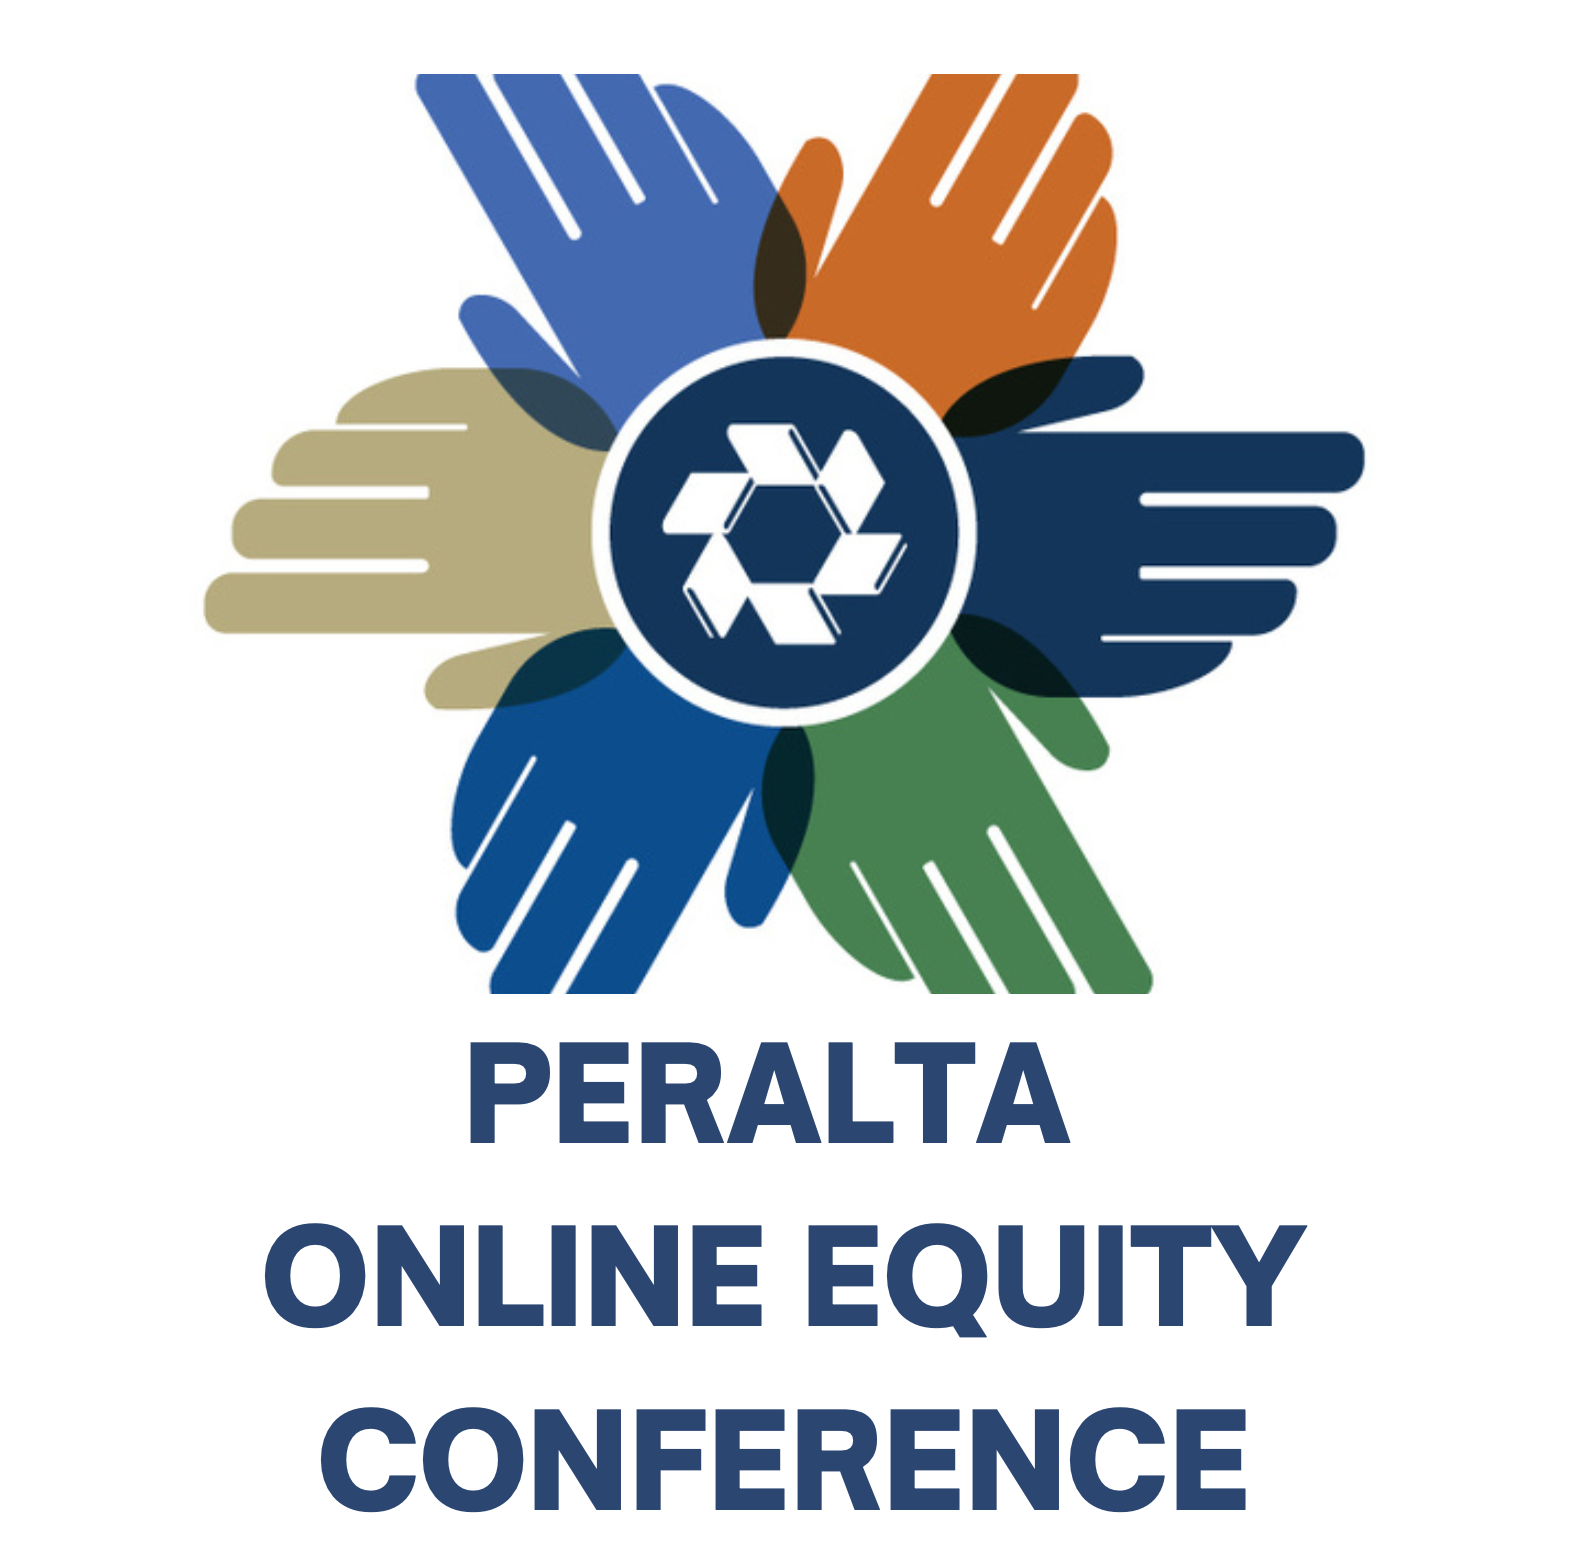 Peralta online equity conference